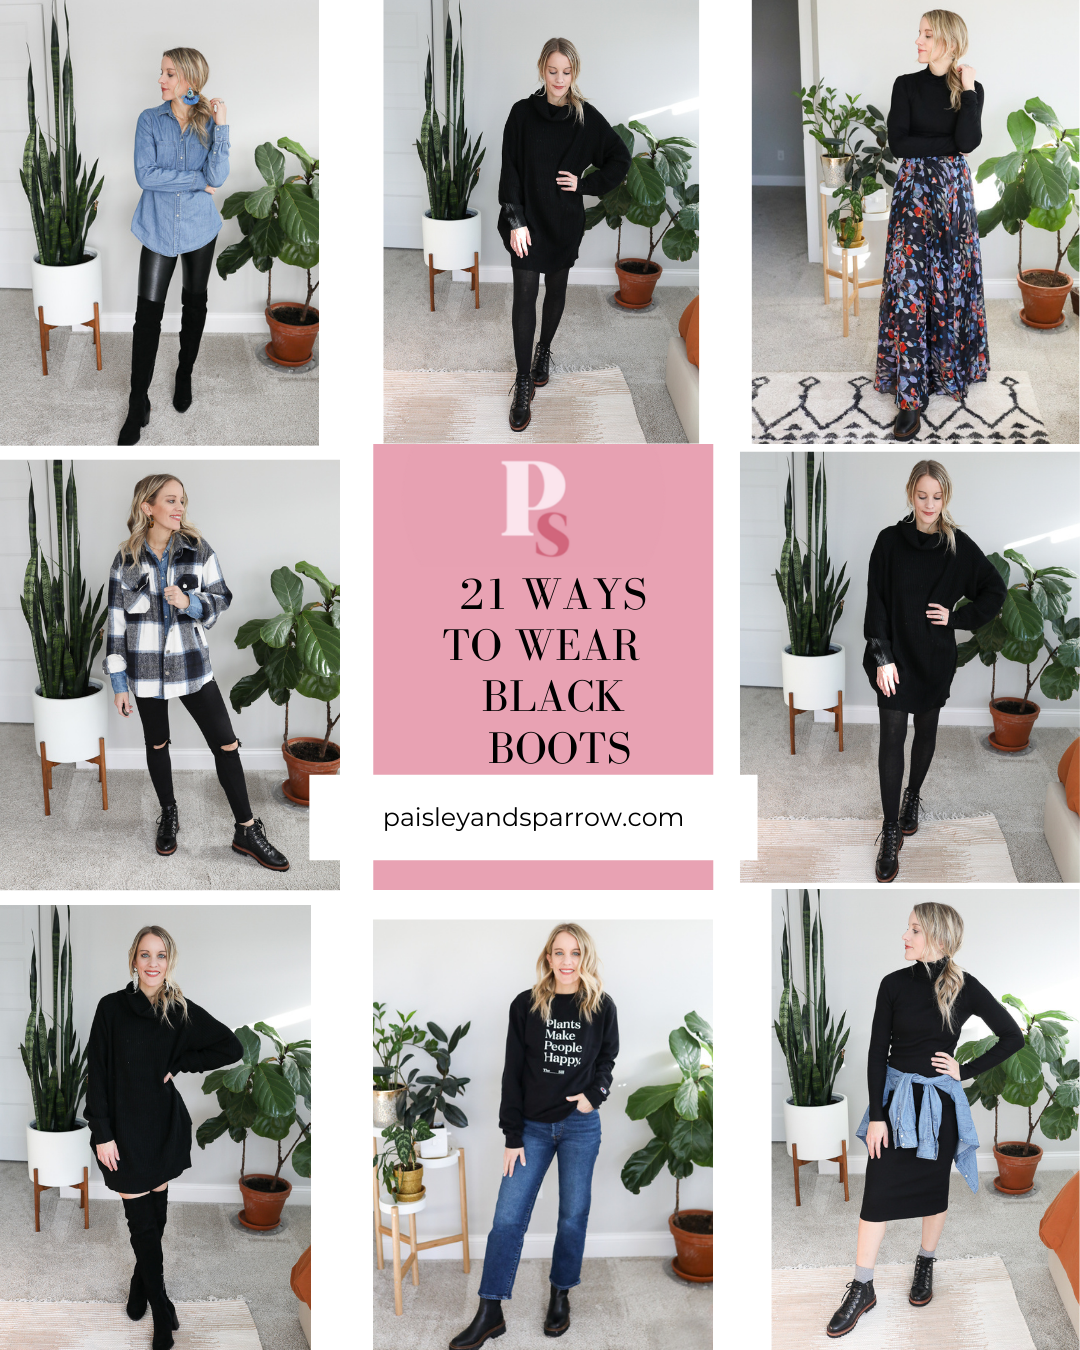 7 Classy Over the Knee Boots Outfit Ideas - Paisley & Sparrow